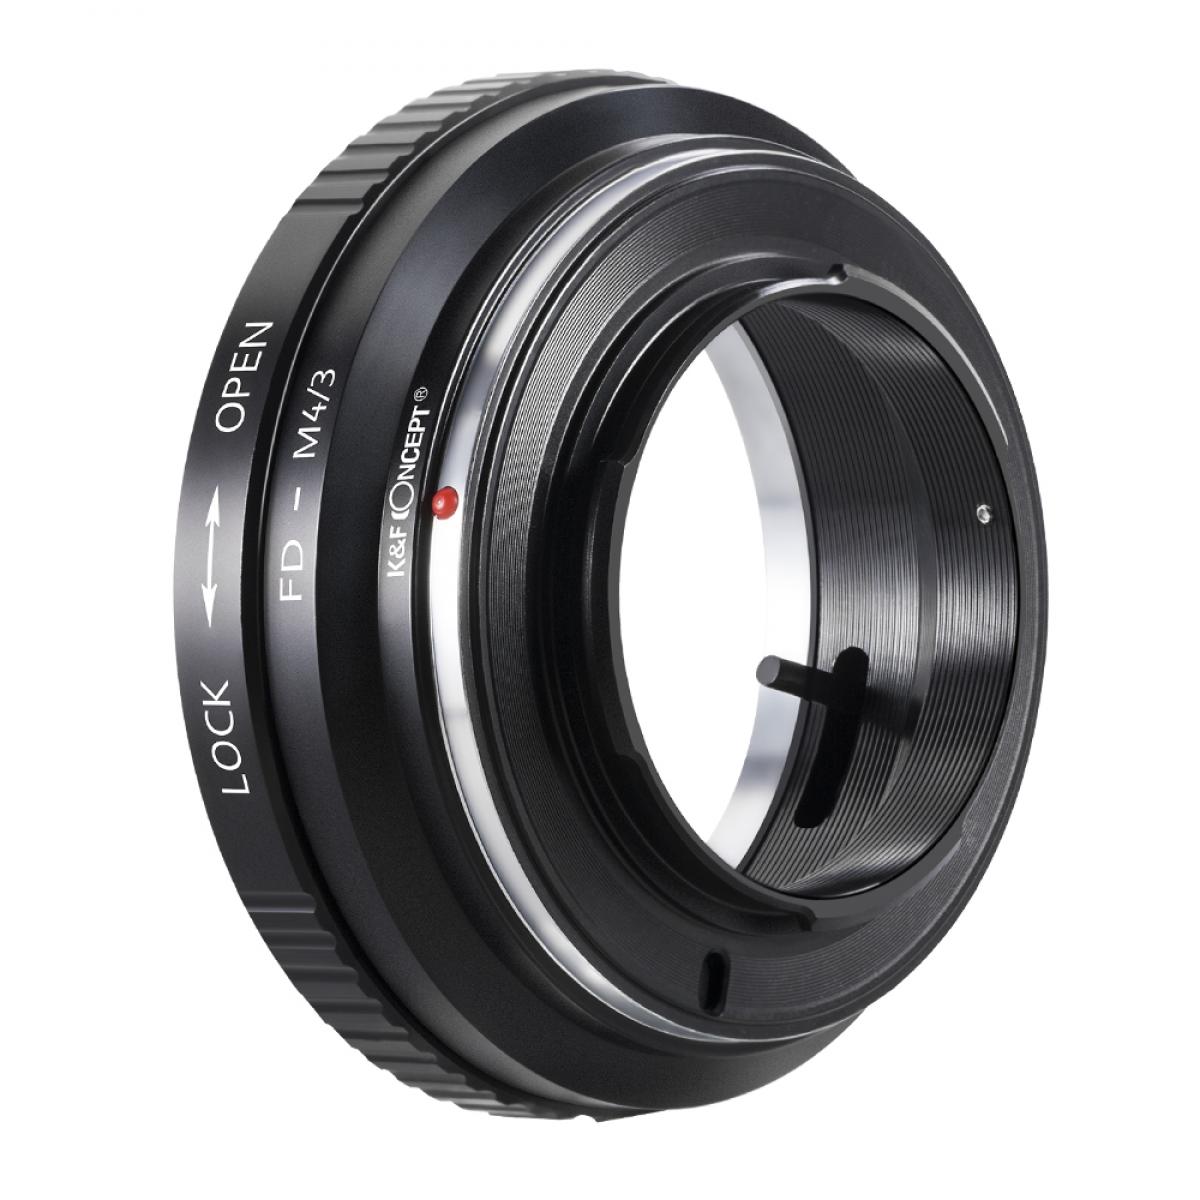 Lens Mount Adapter Ring for Canon FD Lens to Micro Four Thirds M4/3 Olympus Pen and Panasonic Lumix Cameras 